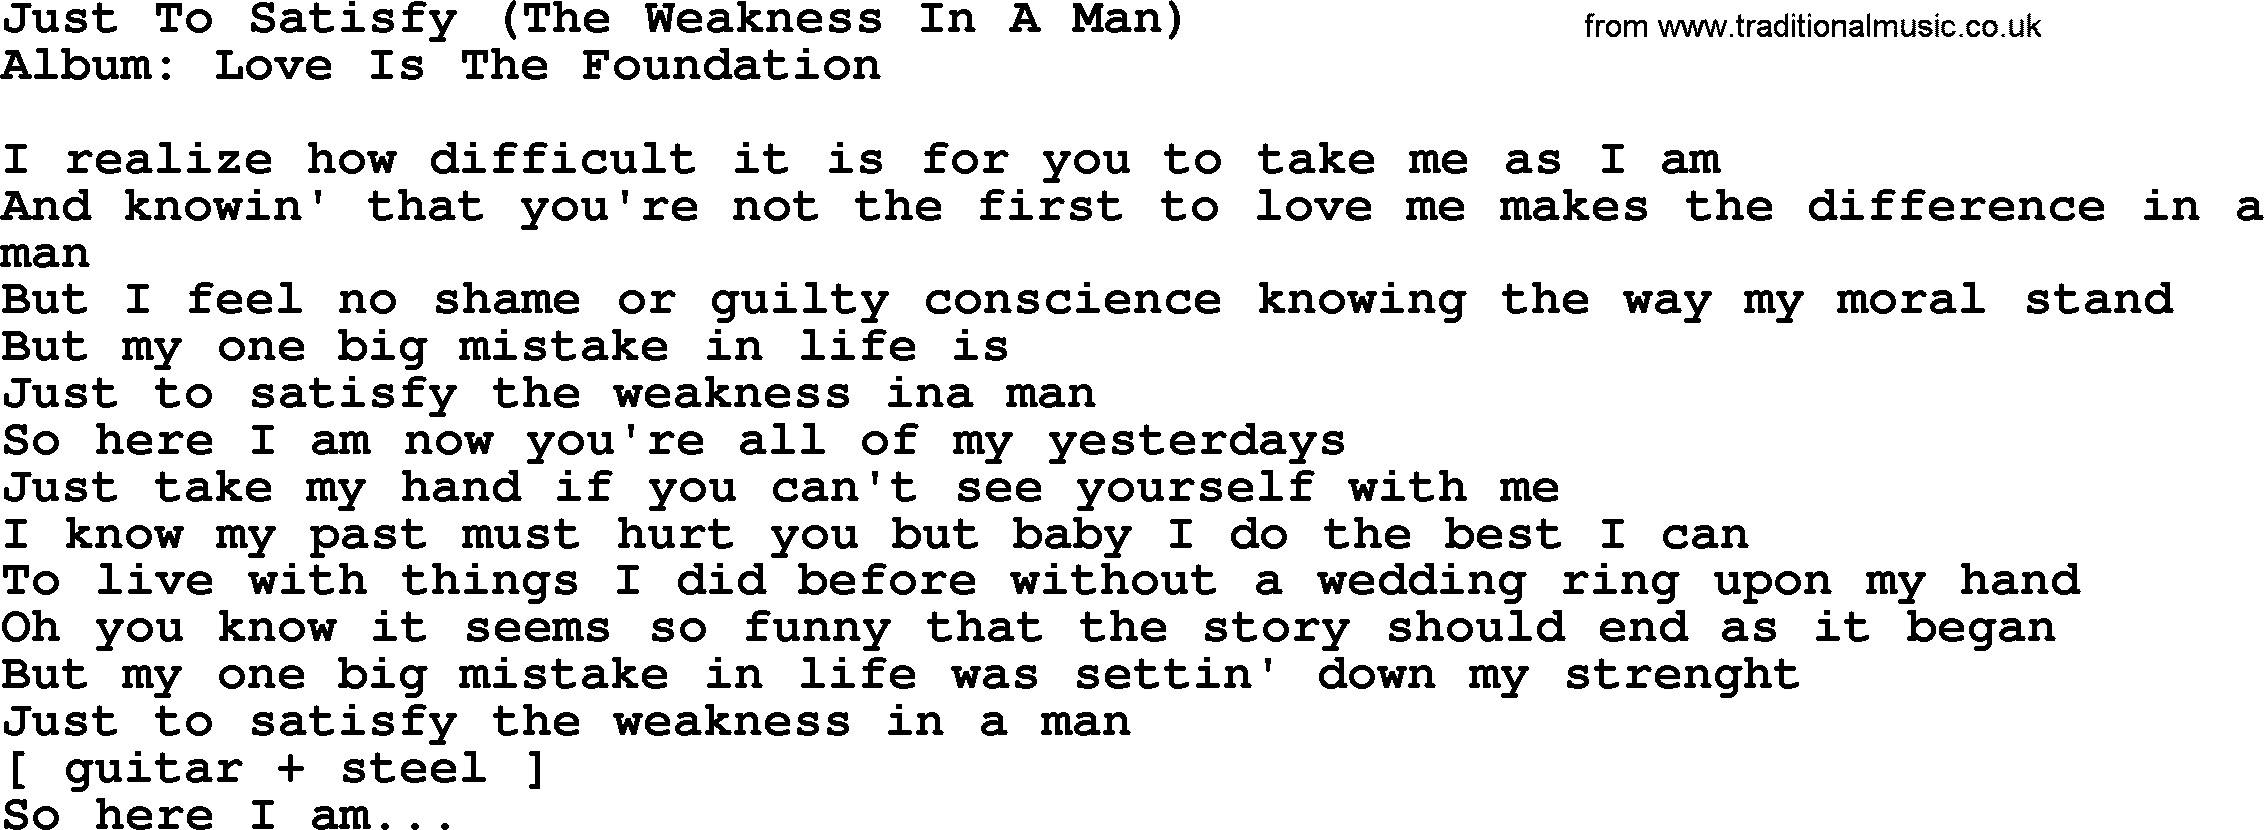 Loretta Lynn song: Just To Satisfy (The Weakness In A Man) lyrics